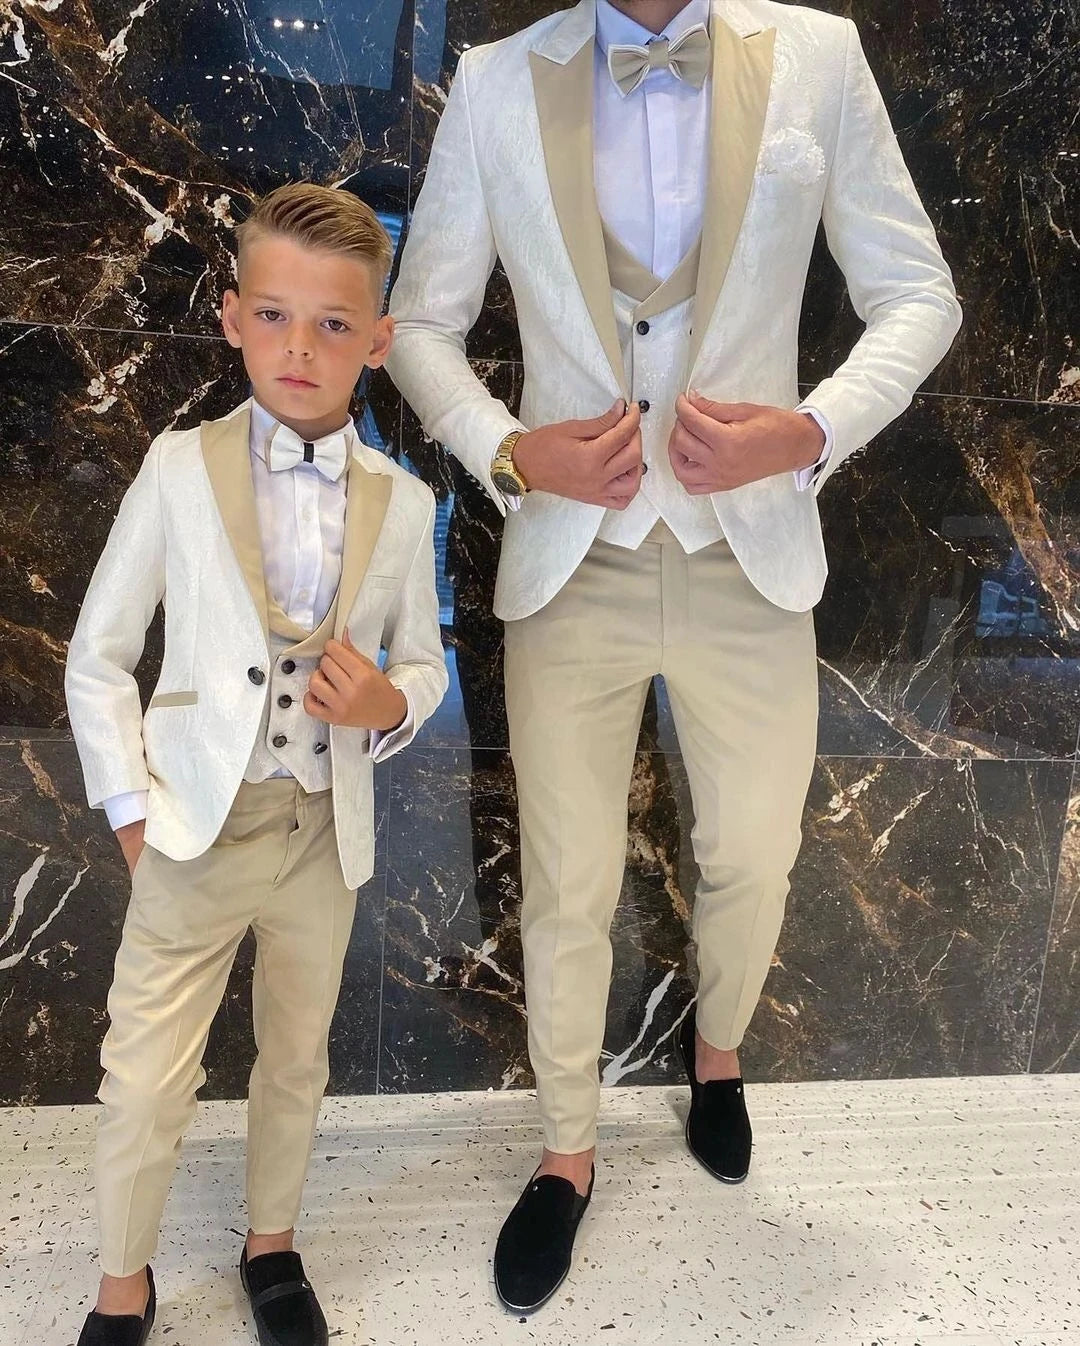 New Arrival Father And Son Men Suits 3 Pcs Cream White Floral Pattern Slim Fit Cocktail Wedding Tuxedos Groom Blazer Custom Made